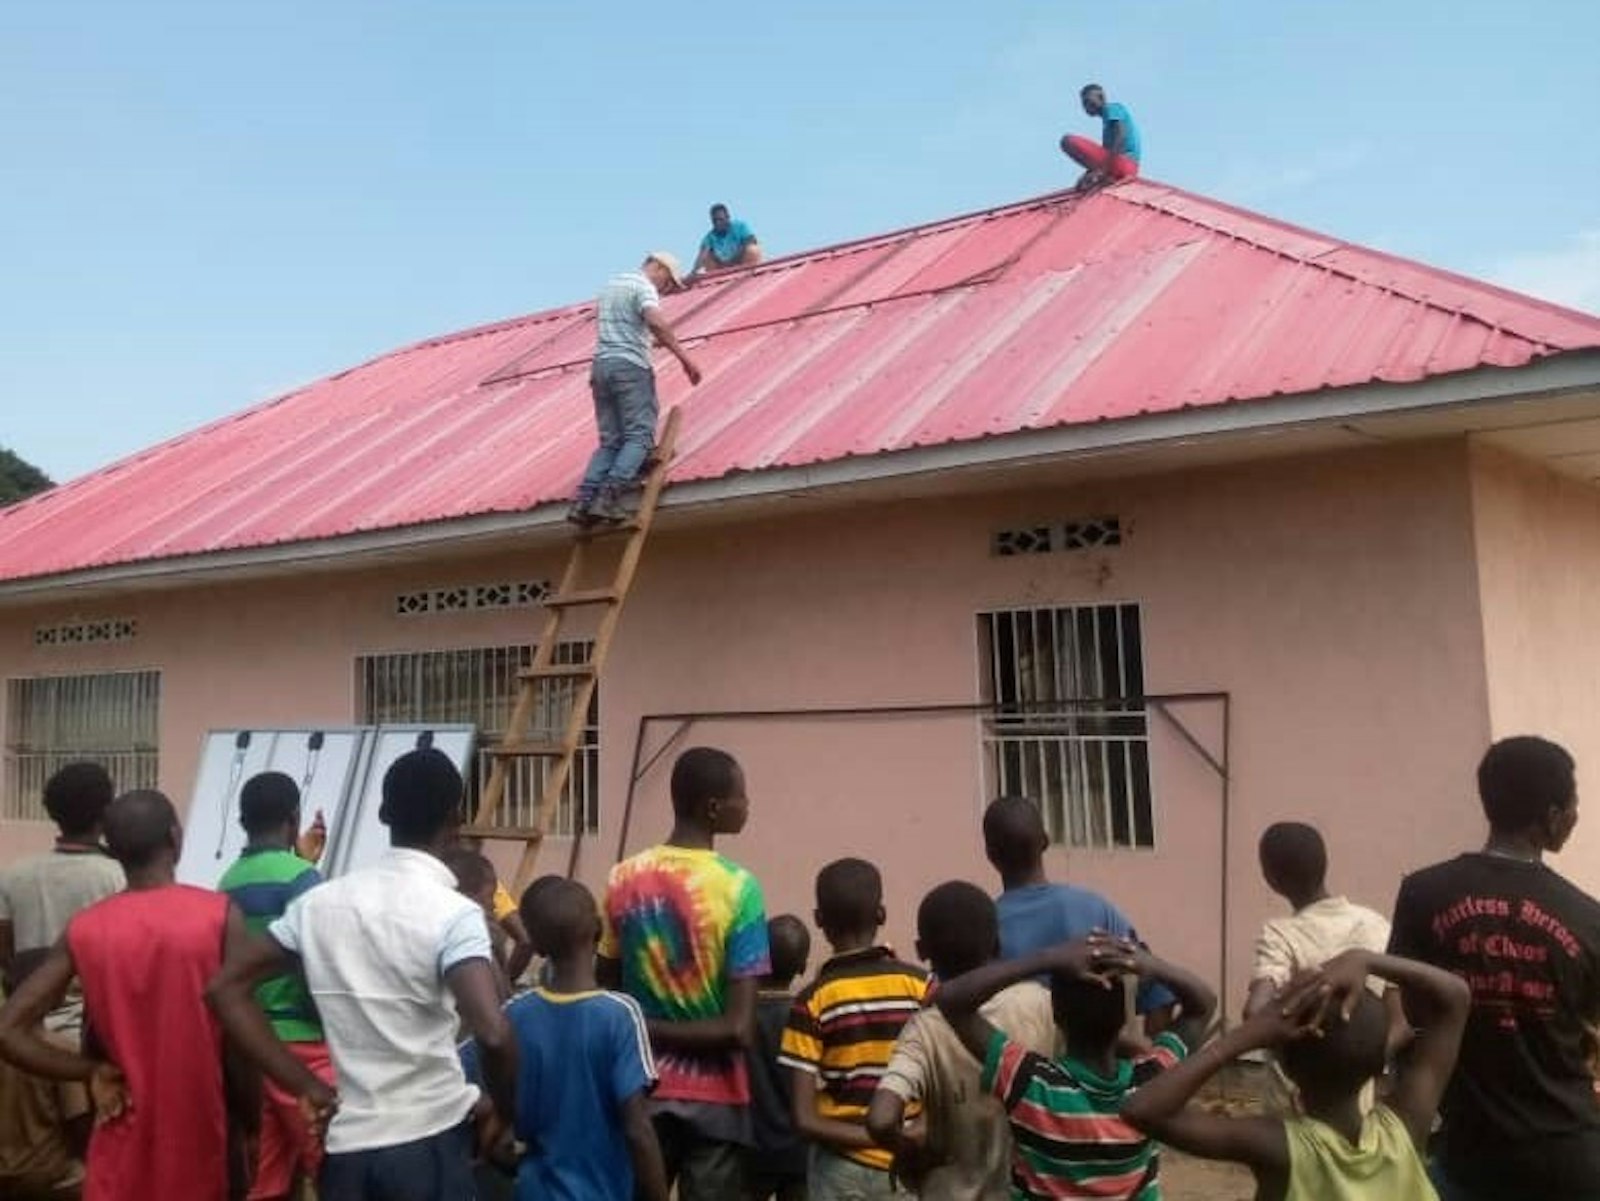 Workers prepare to mount solar panels to the roof of the clinic in January 2021 that would power a well to provide clean water to the town.